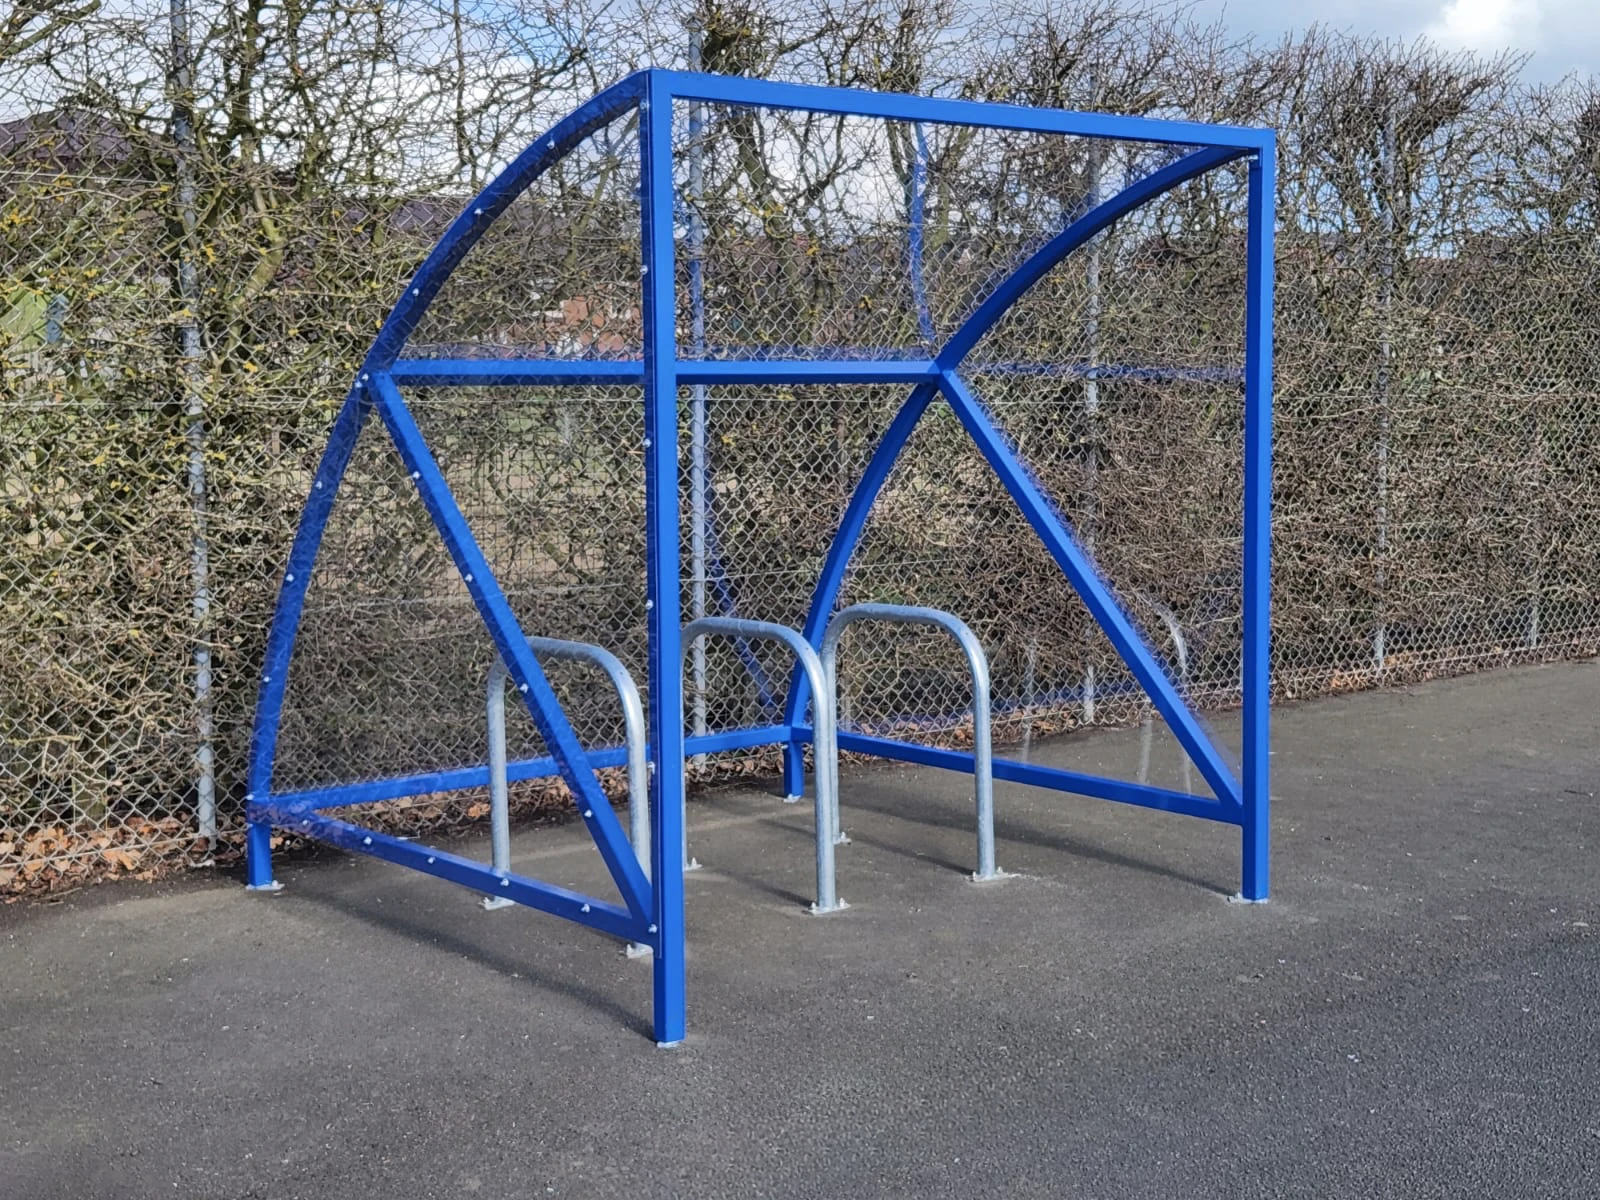 6 space original cycle shelter with galvanised Sheffield stands